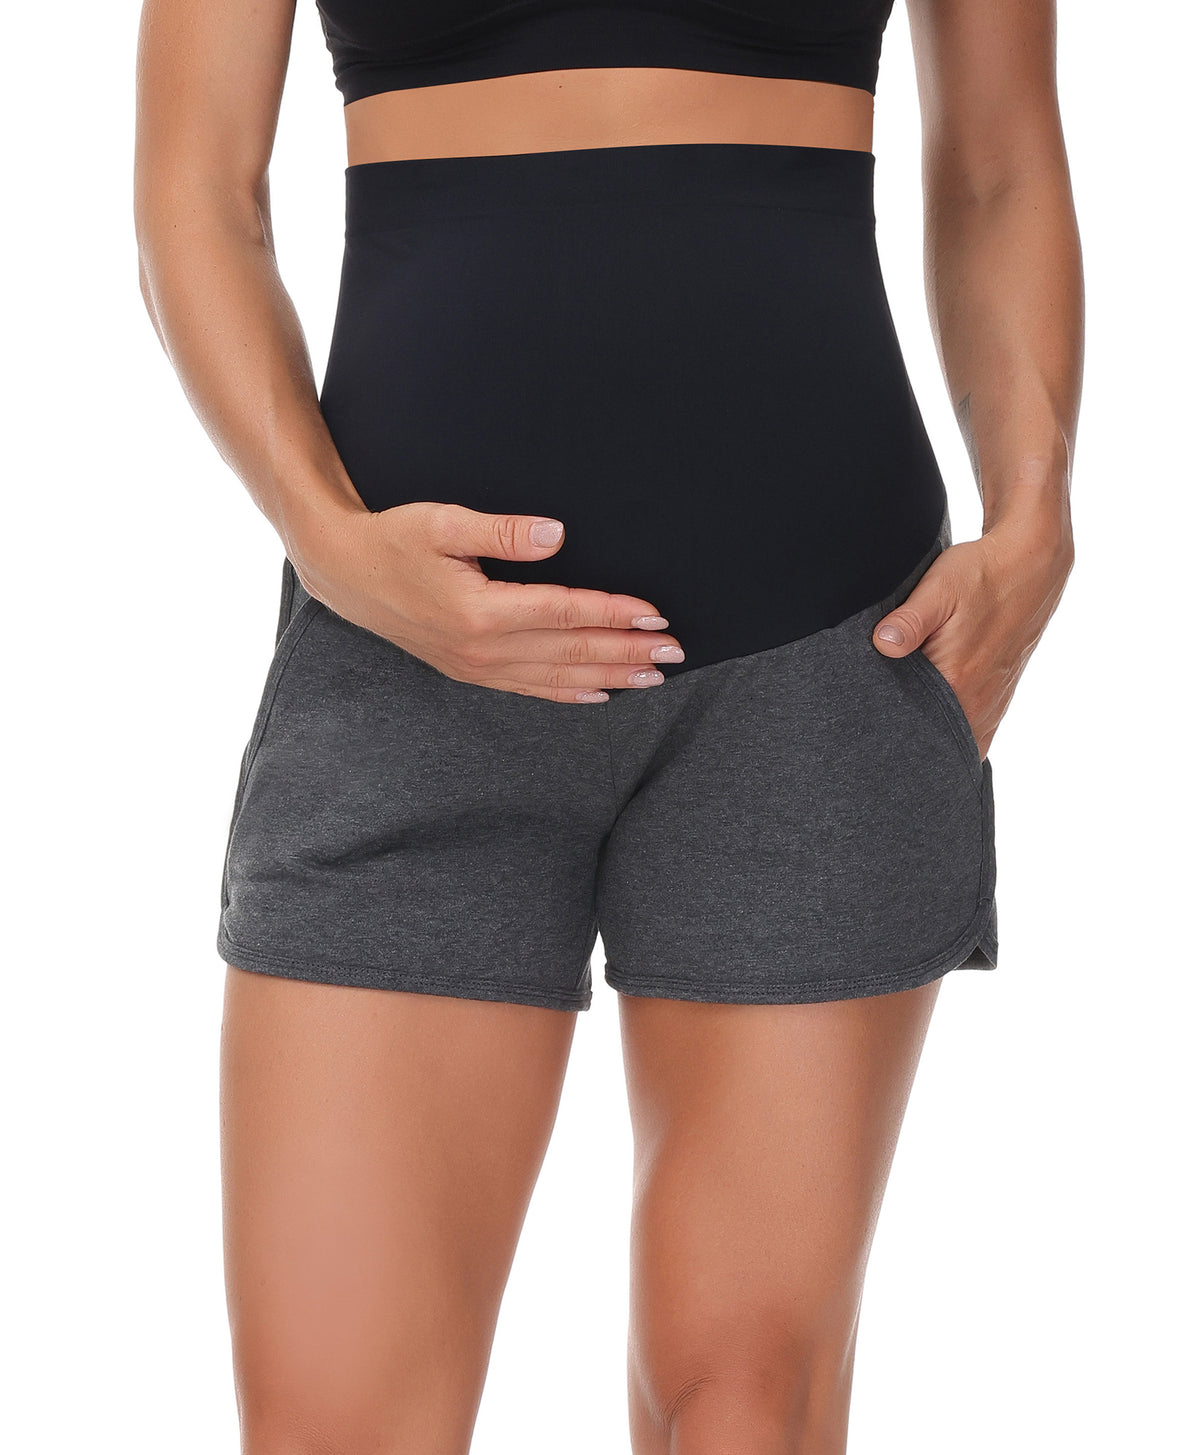 Over The Belly Pregnancy Support Cotton Maternity Shorts Grey